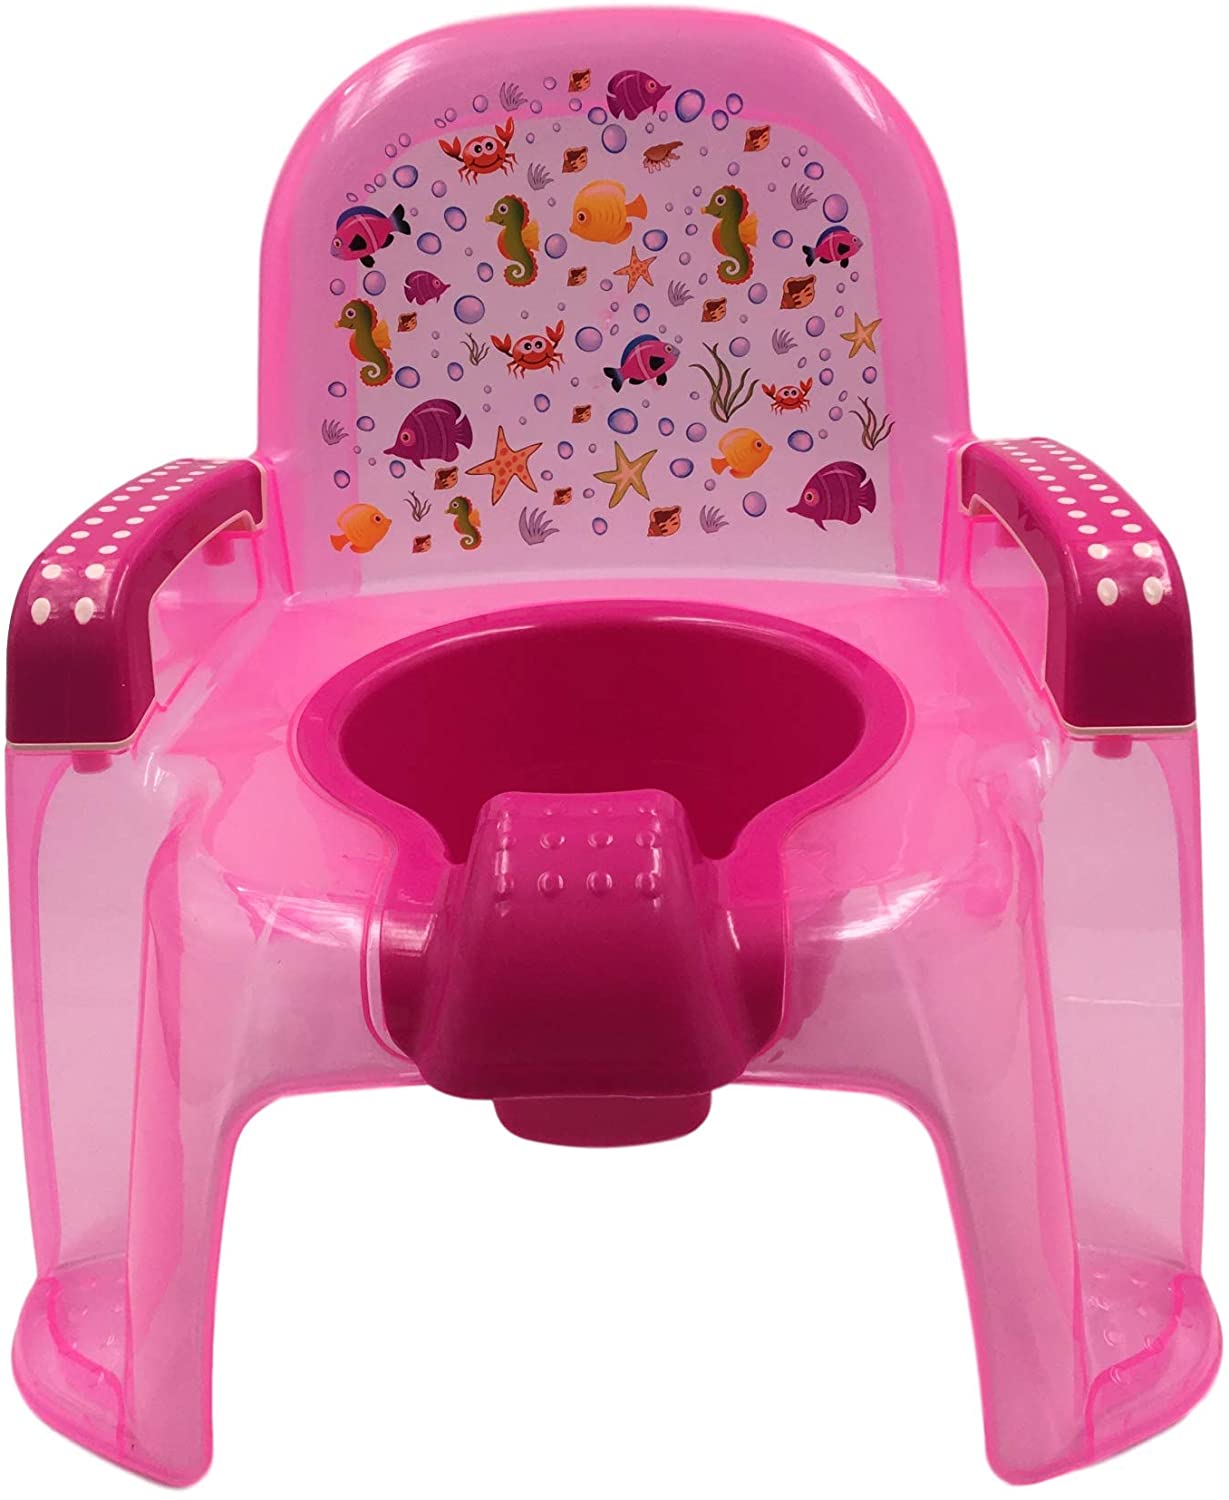 Colorful Plastic Potty Trainer for Babies/Toddlers 🚼 Comfortable Chair with Handles